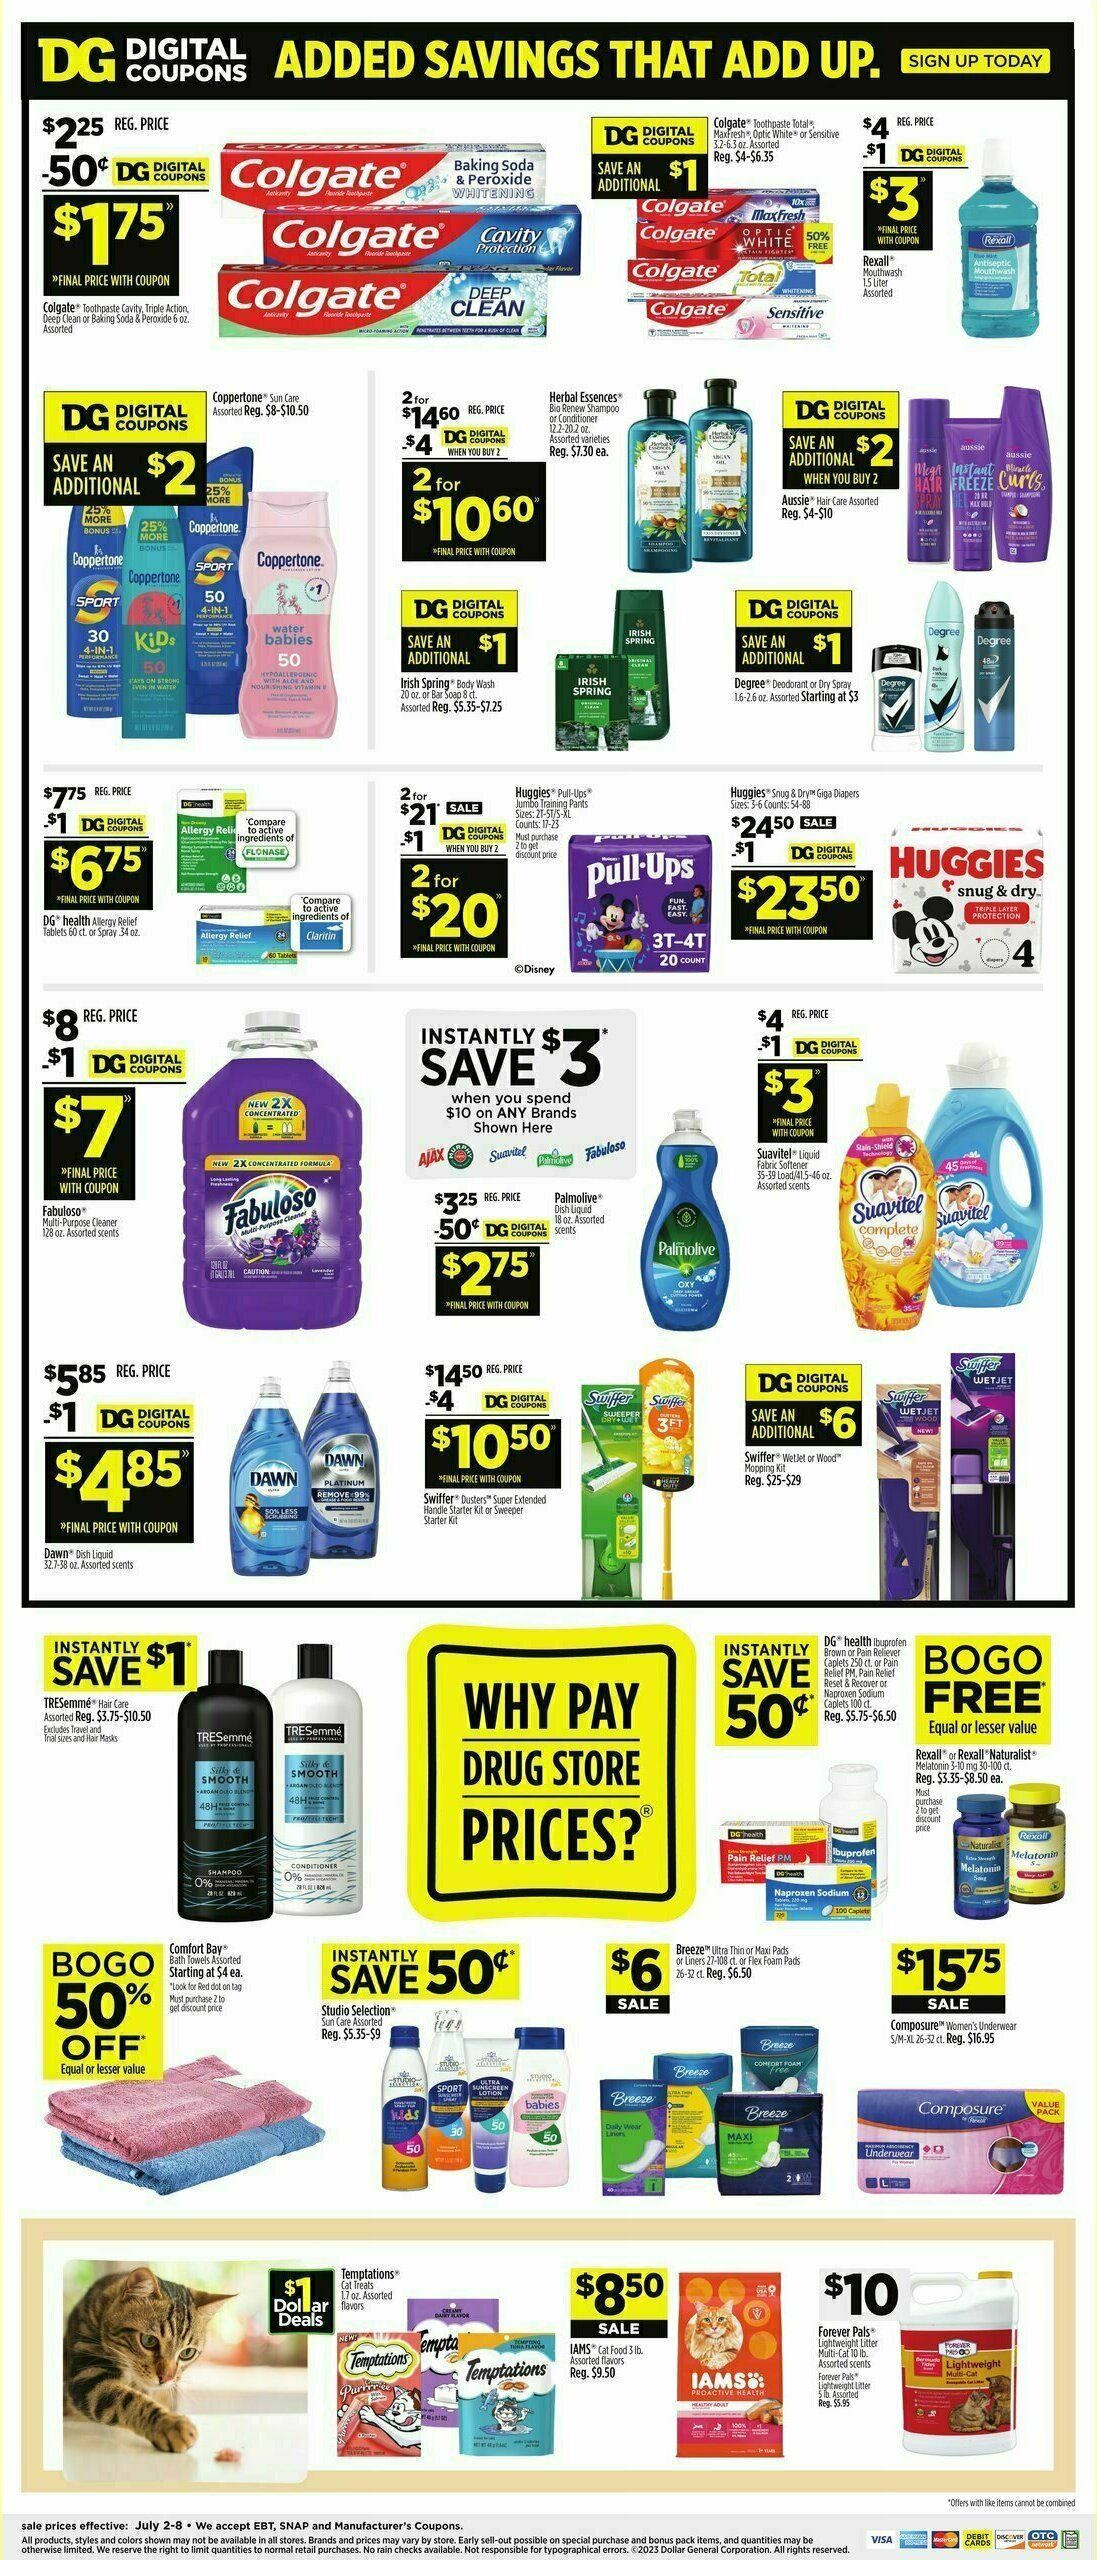 Dollar General Weekly Ad from July 2